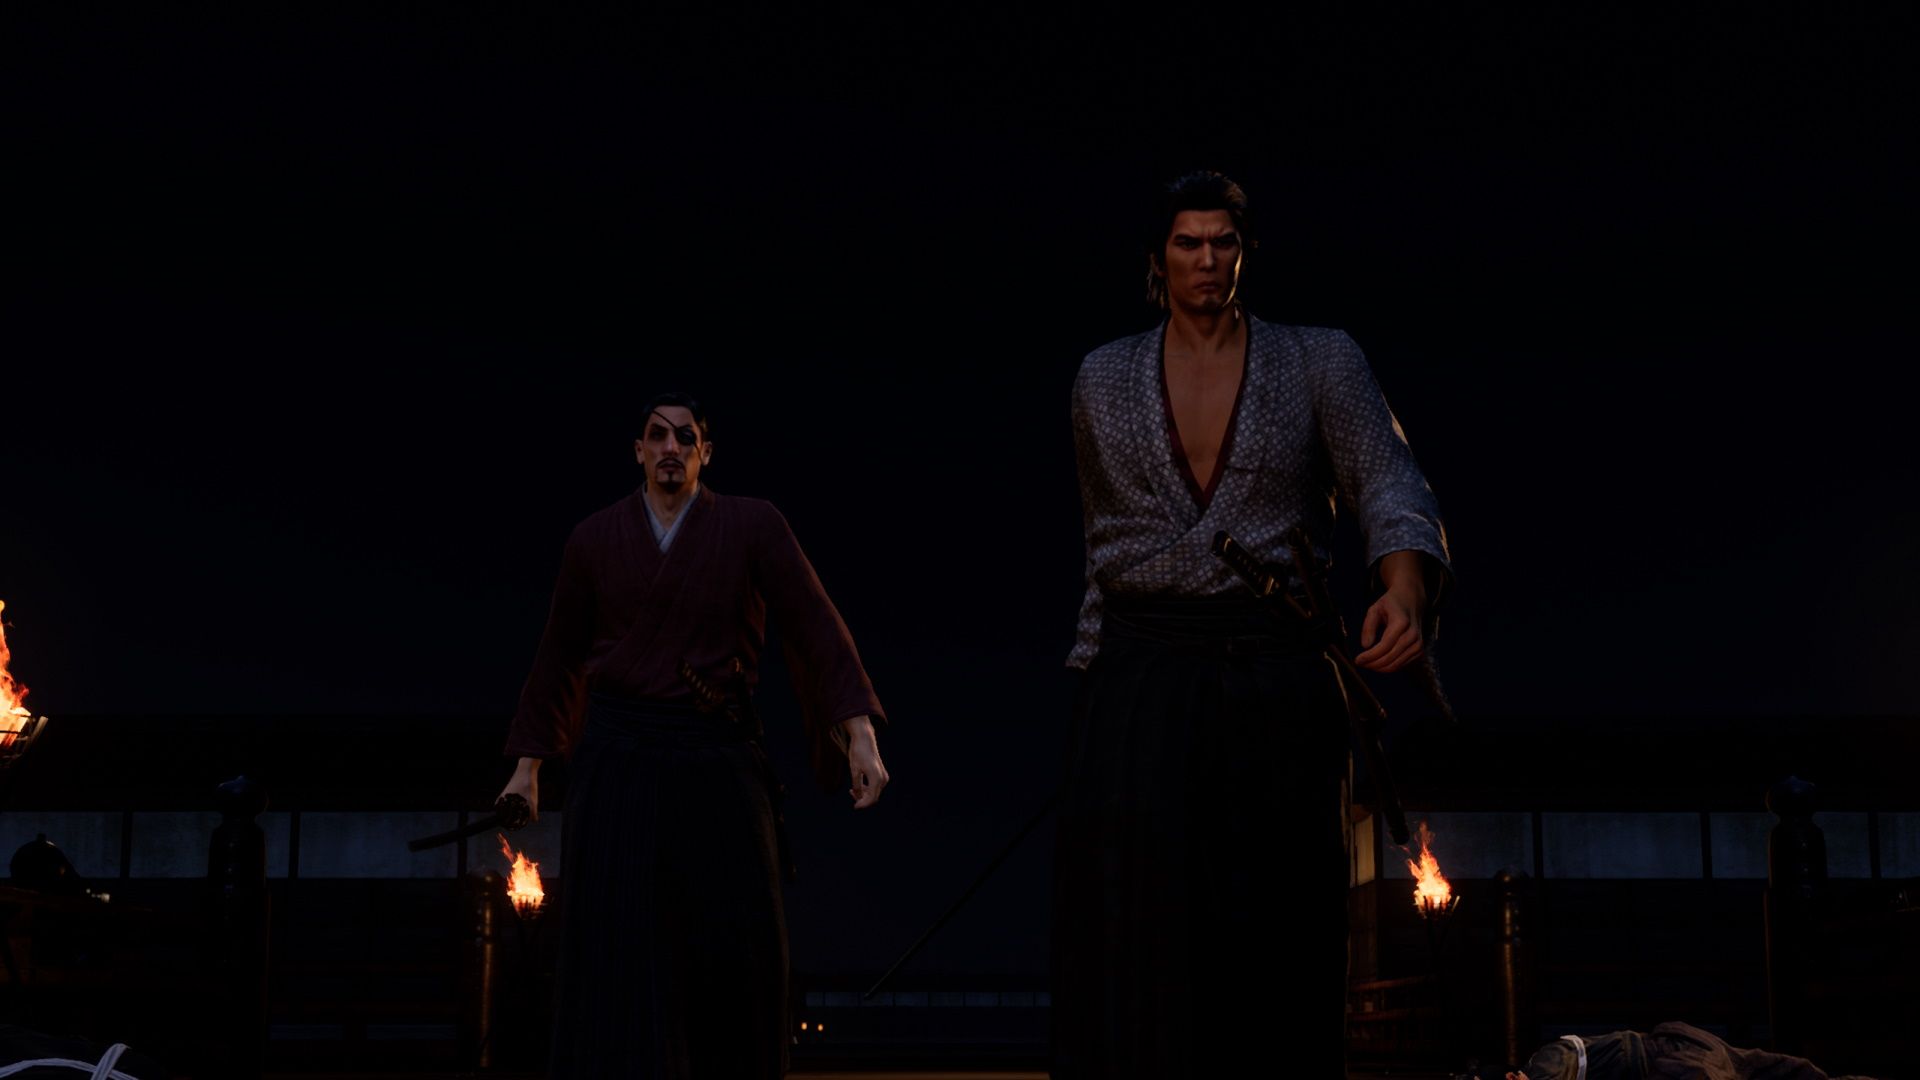 Like A Dragon Ishin, Ryoma and Okita marching in through the front gate